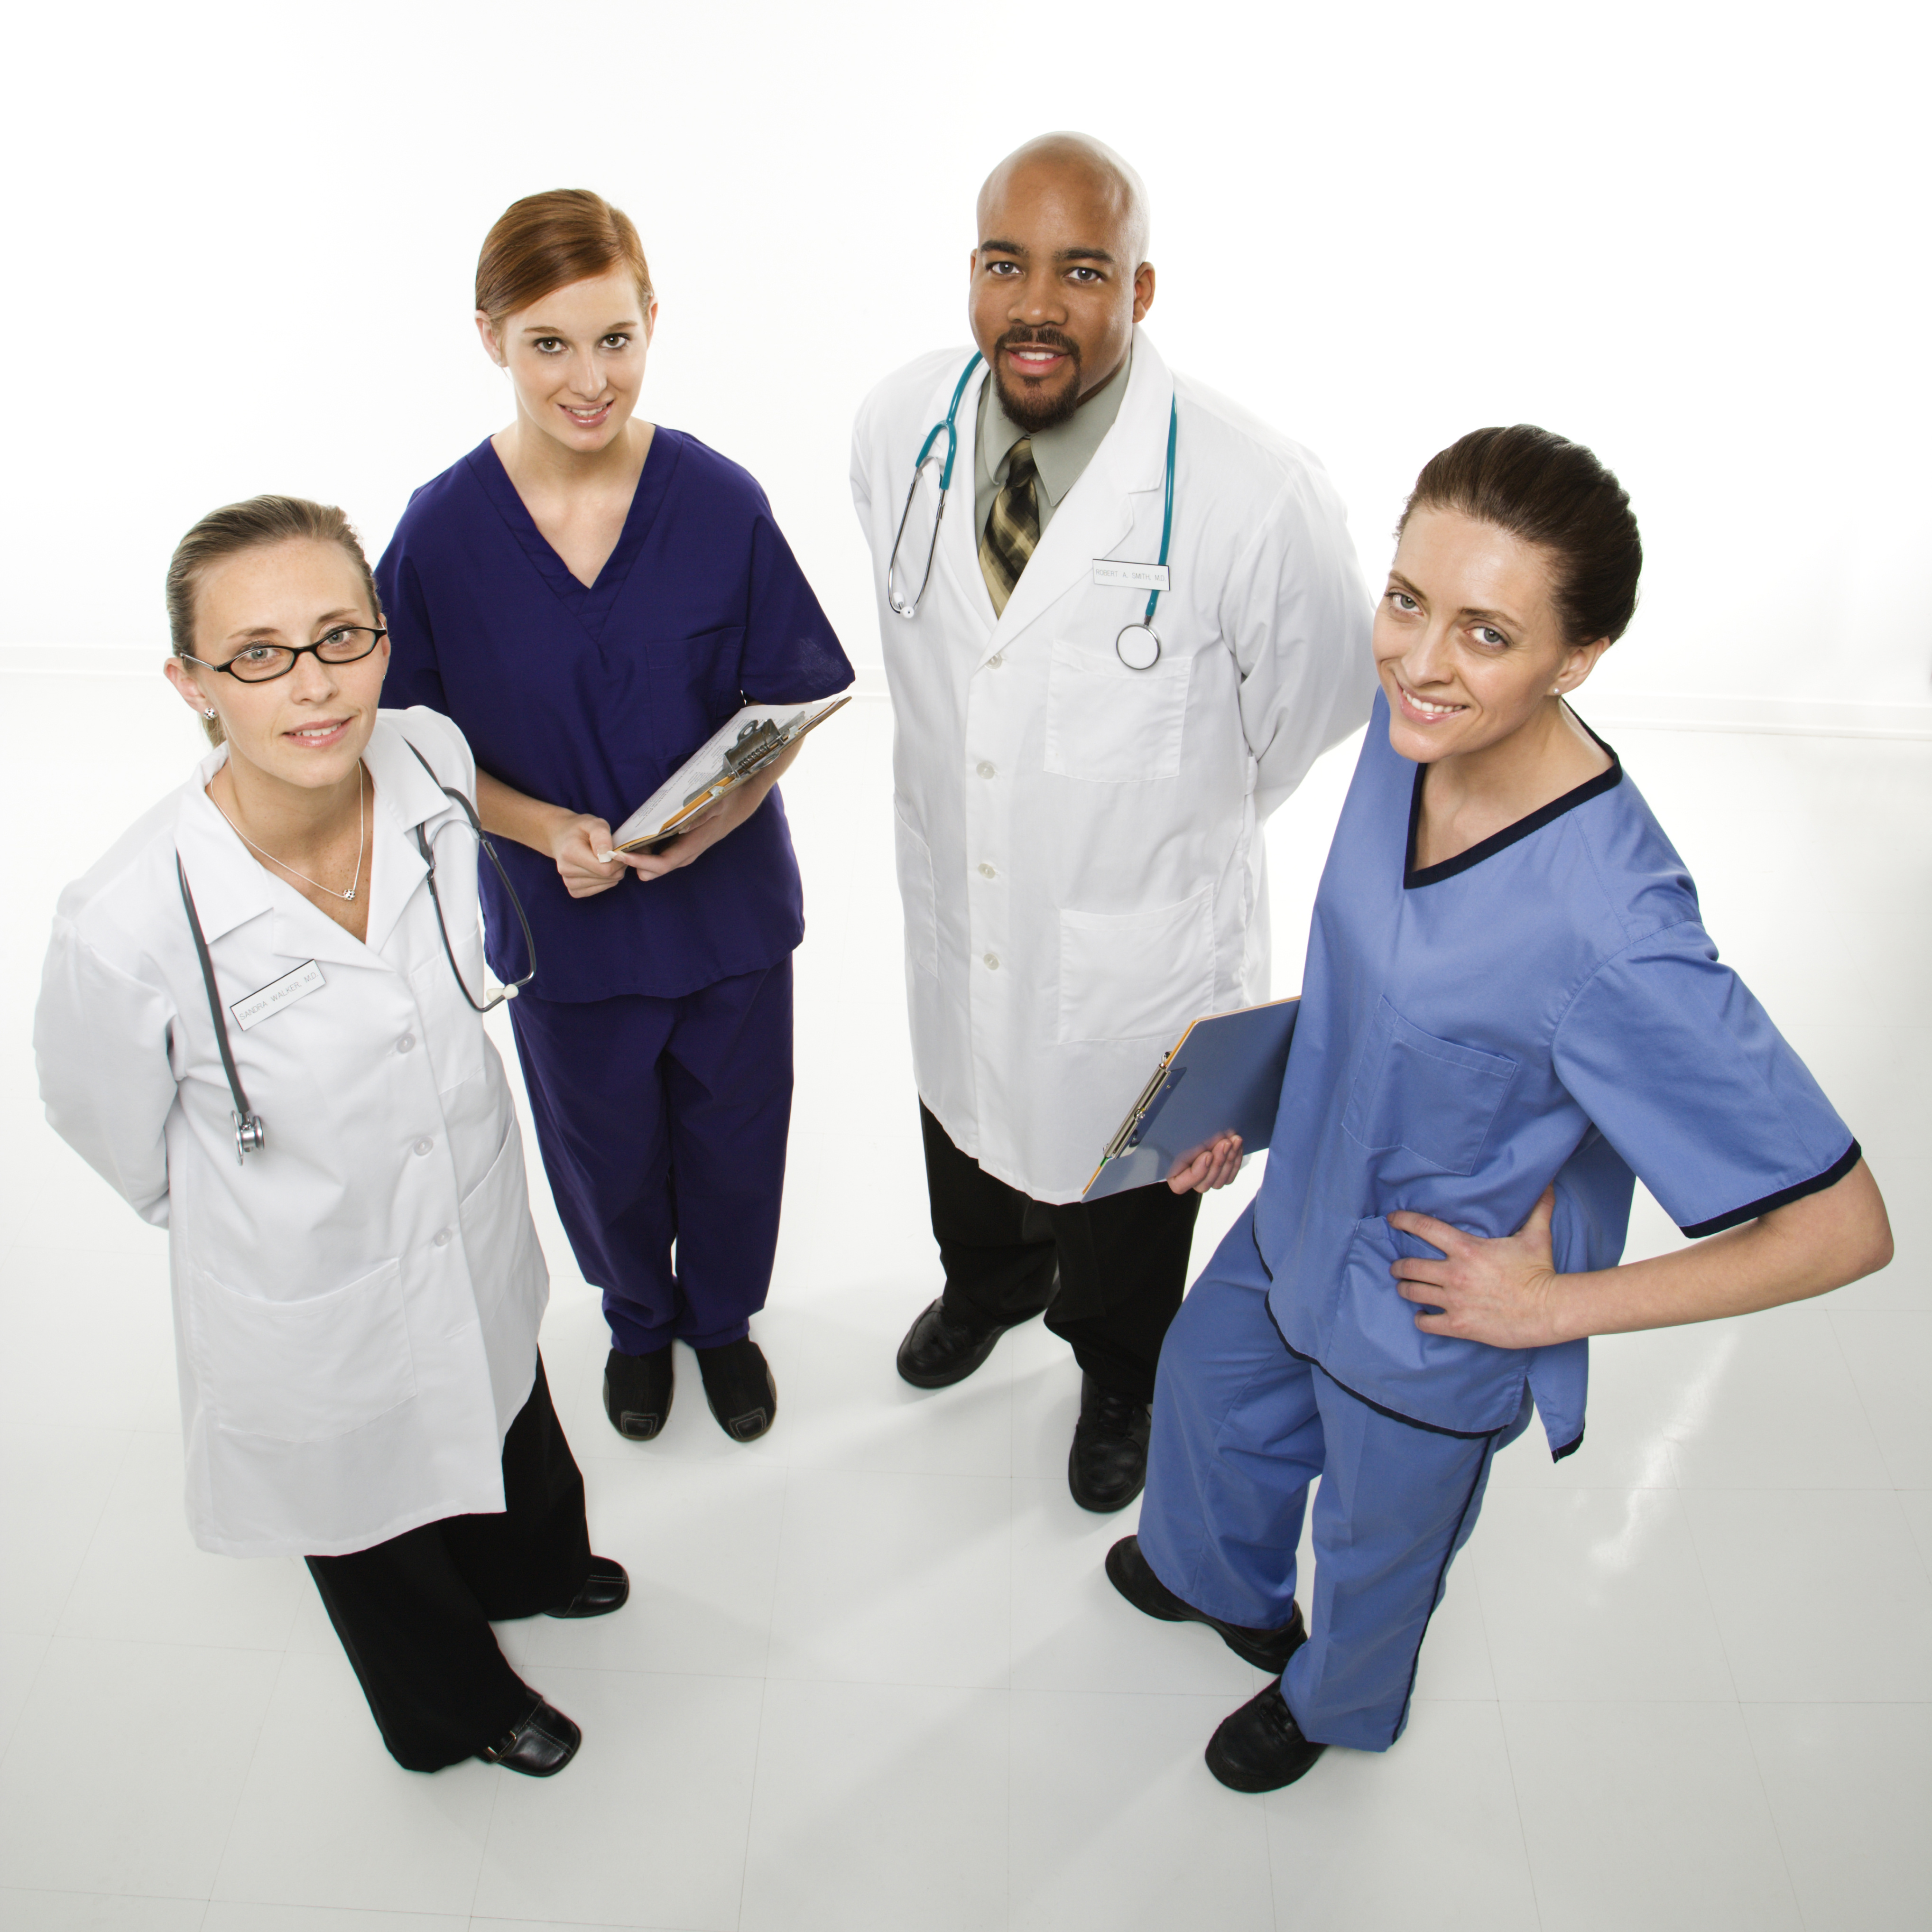 portrait of medical healthcare workers.